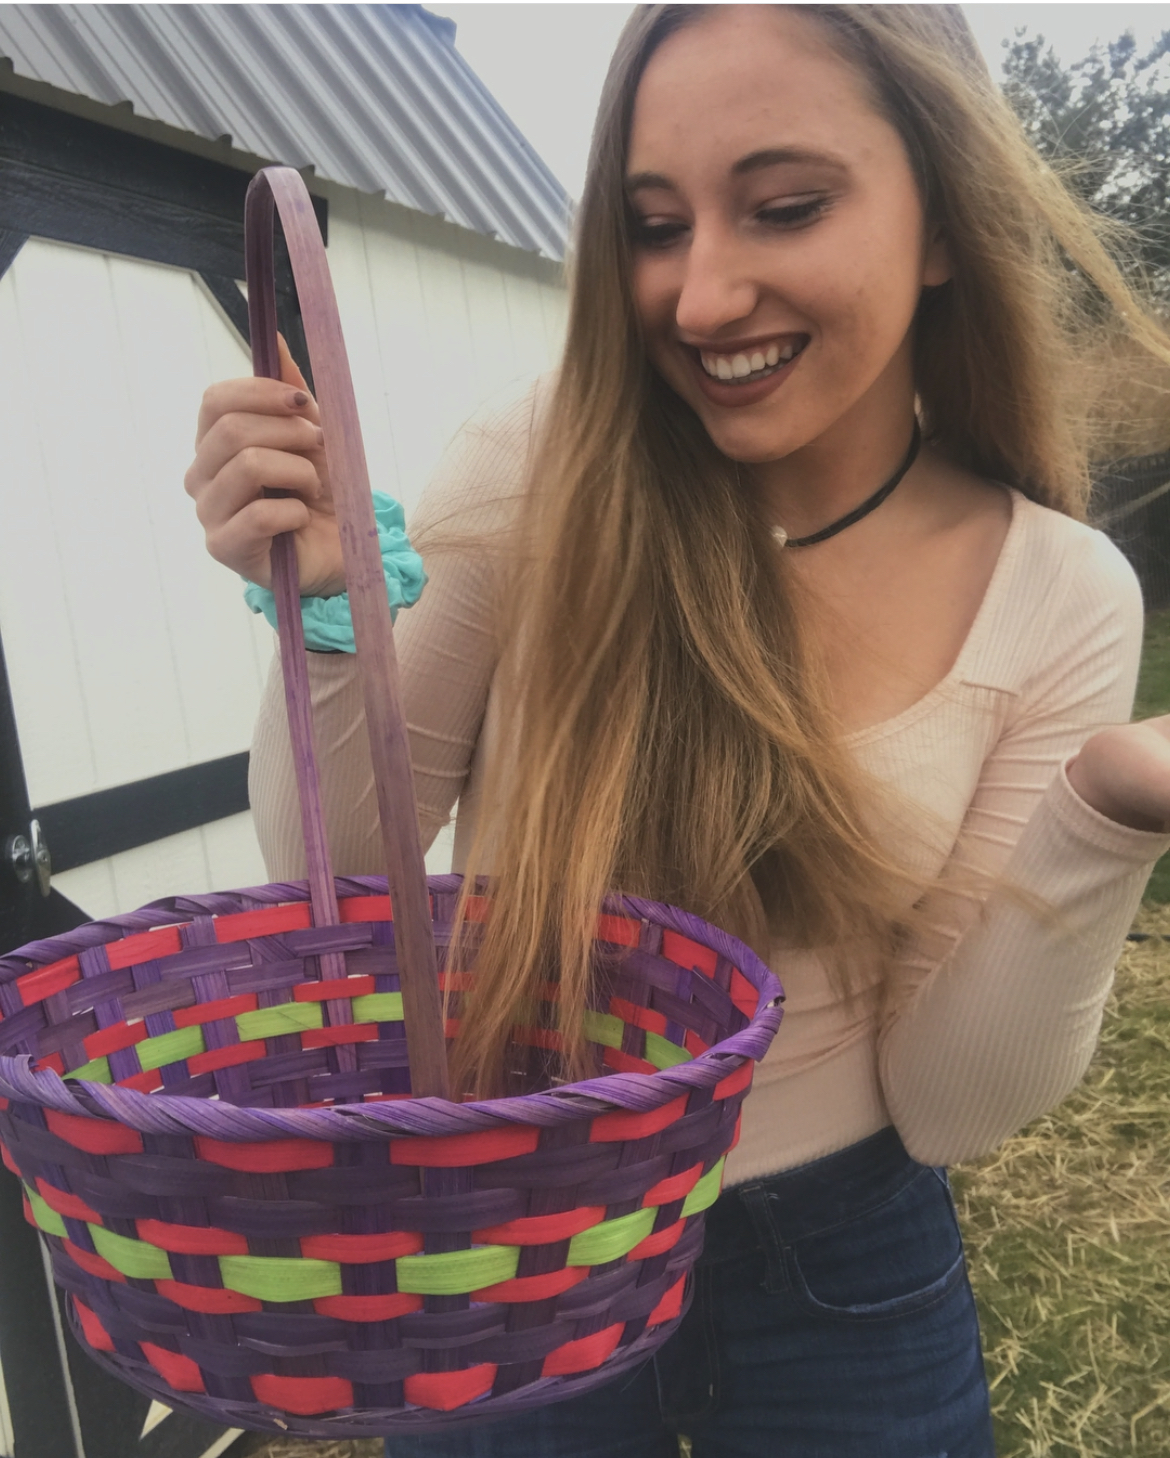 Egg-citing Adult Easter Activities